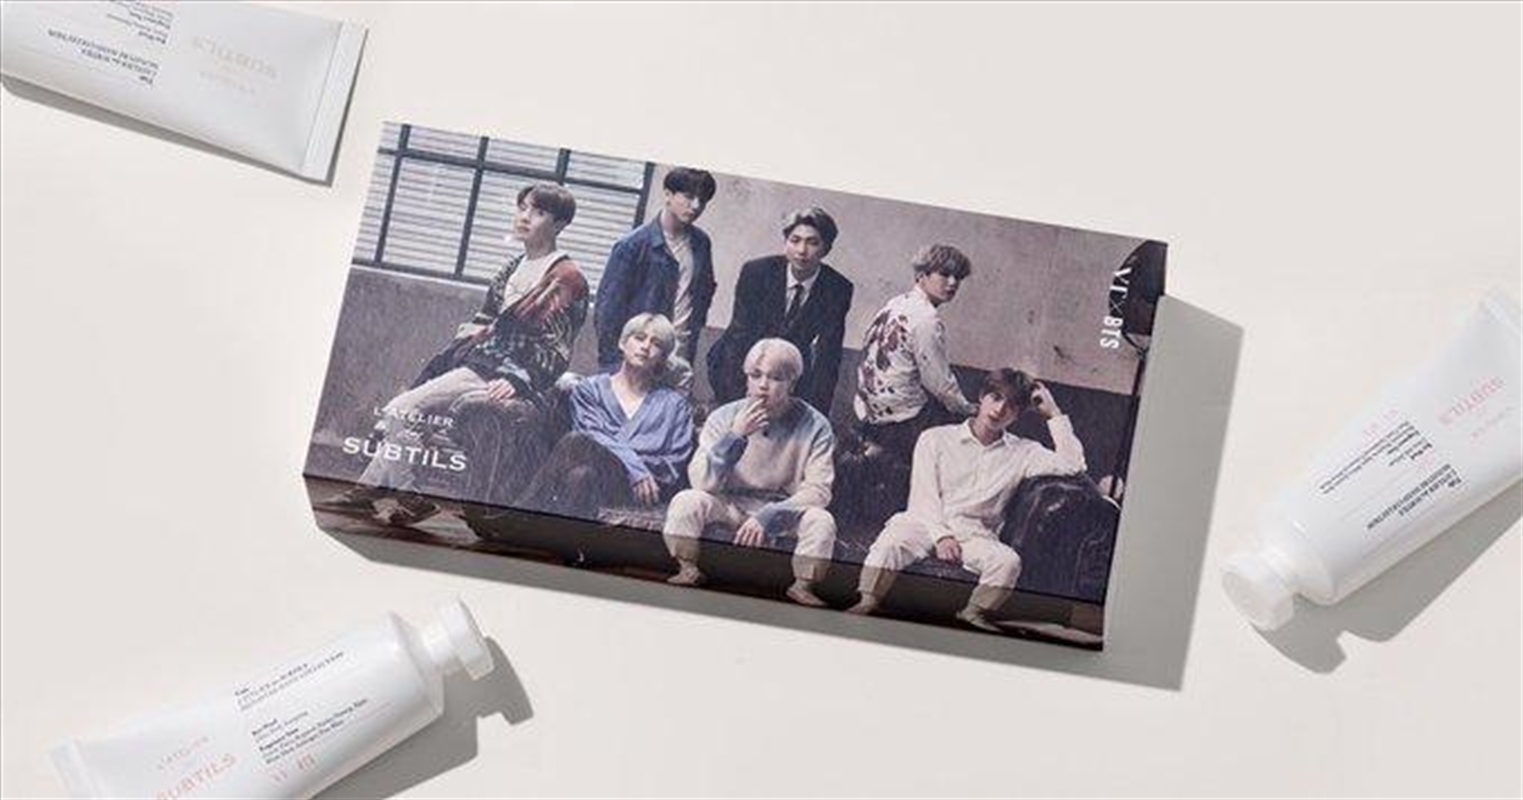 Vt X Bts Latelier Des Subtils - Hand Cream Set - 7 Members/Product Detail/Health & Wellbeing